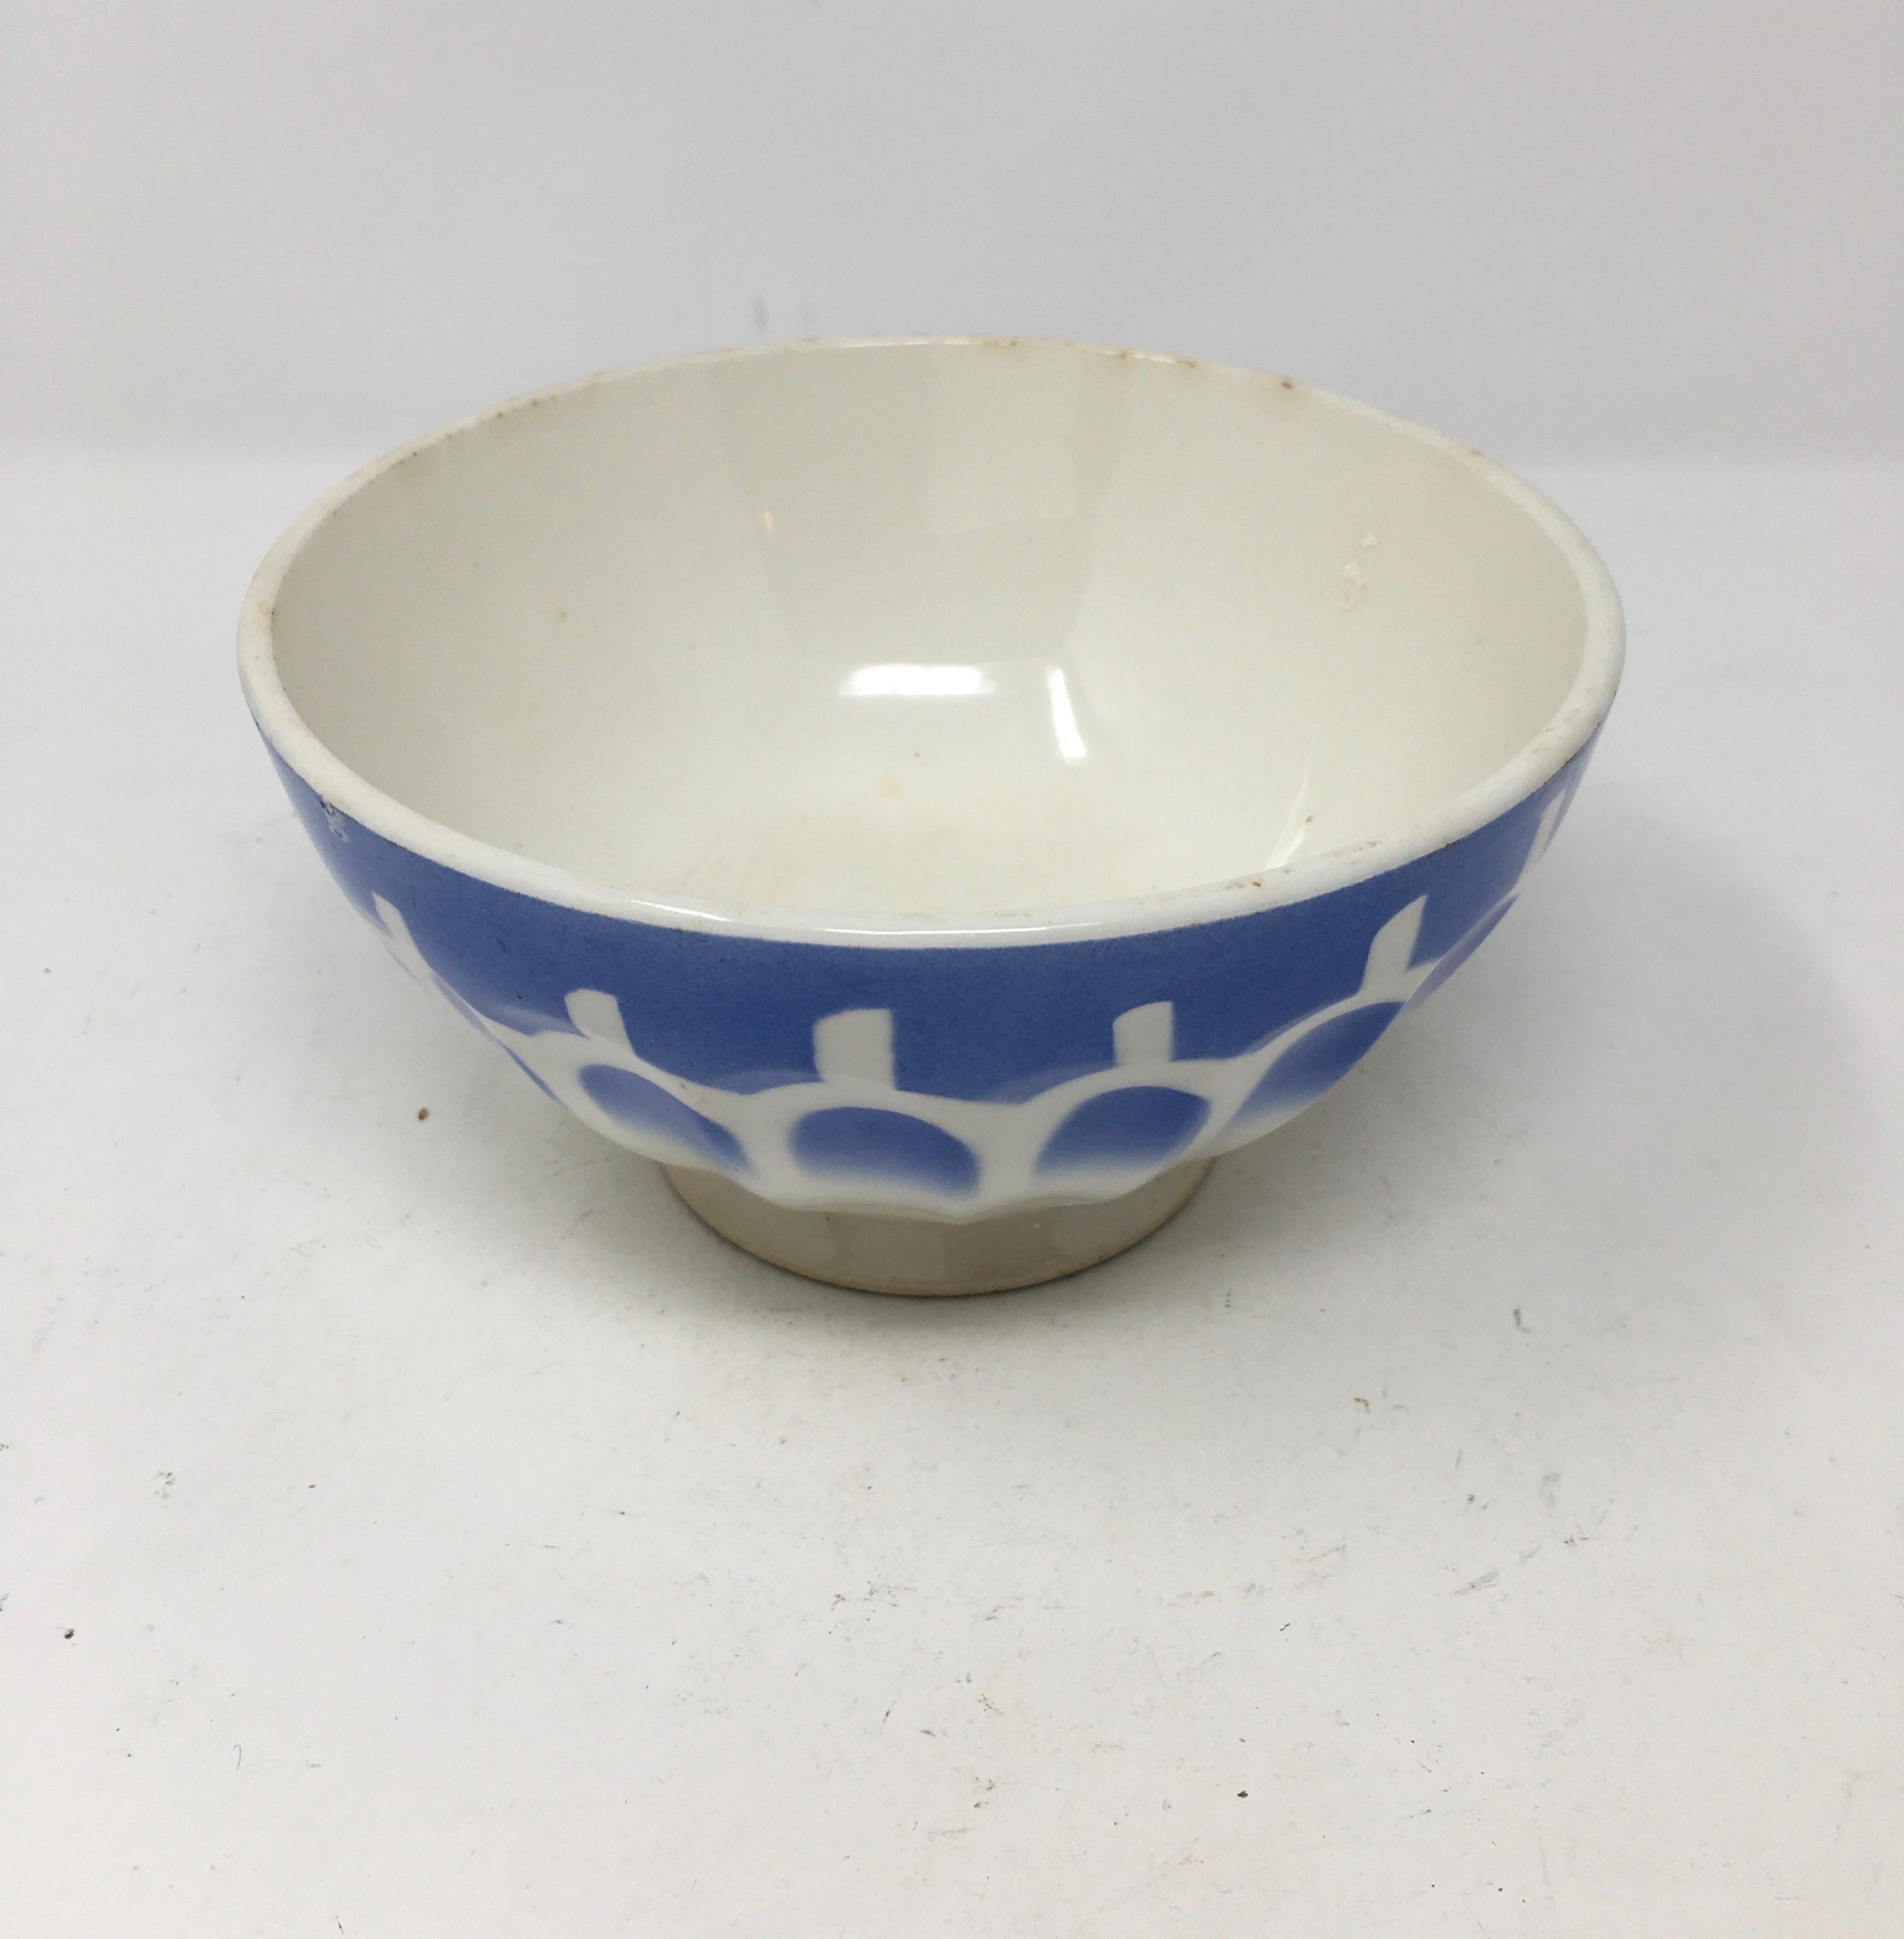 Found in the South of France, this Café au Lait bowl, was originally used in France to serve coffee or hot chocolate. Perfect for serving desserts or for a French country decor. Beautiful to mix and match with other bowls.